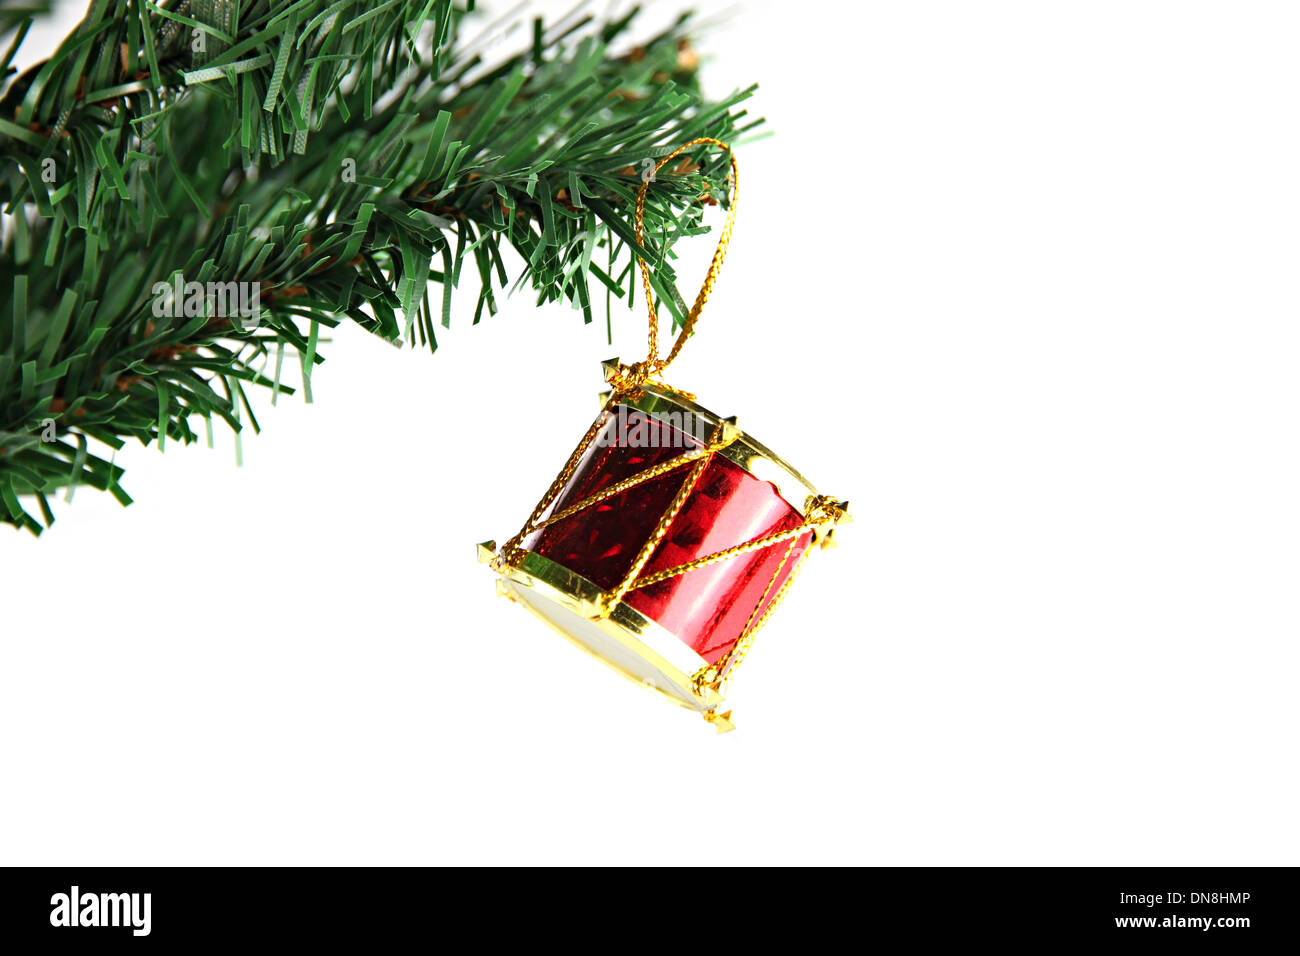 The Picture Red Druml hanging on branch Christmas tree. Stock Photo